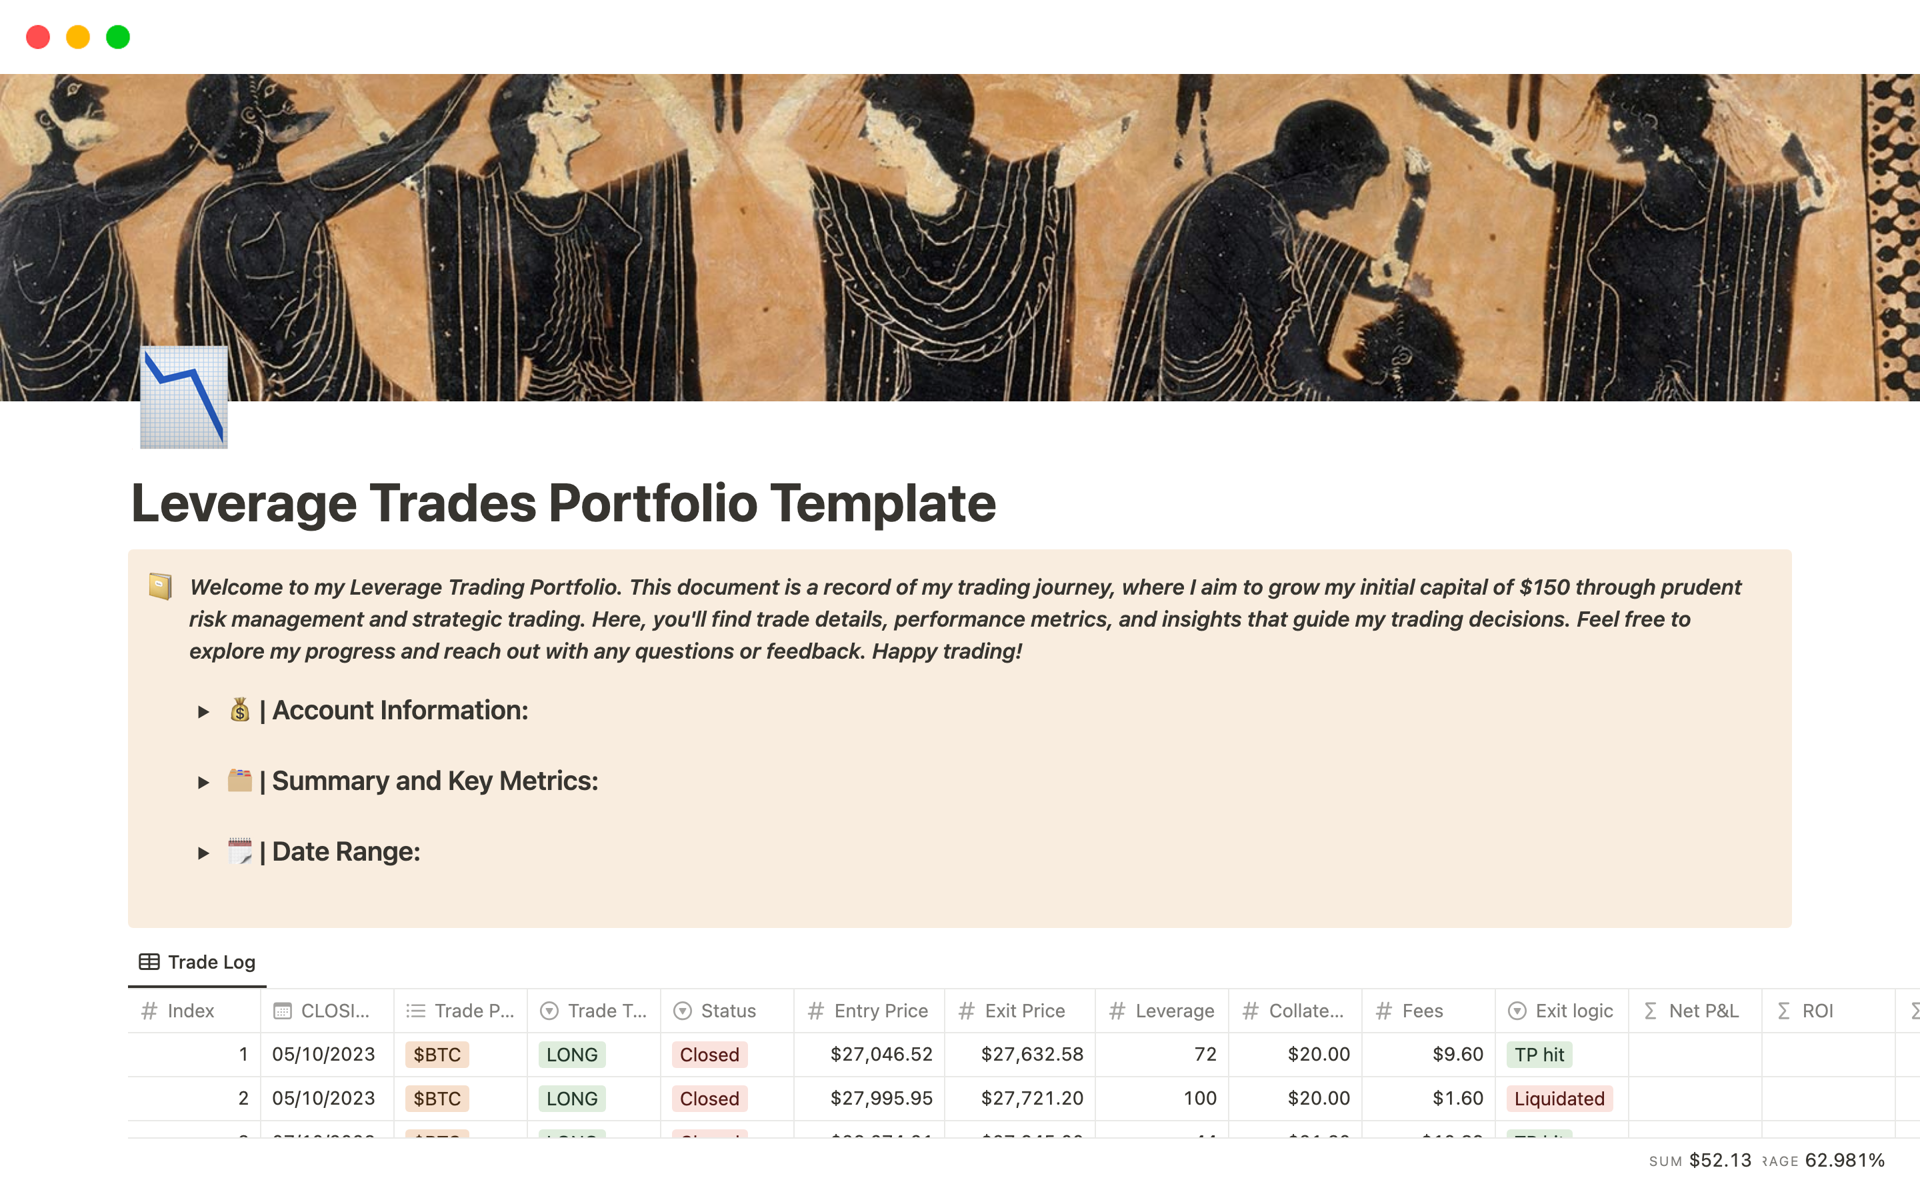 Comprehensive Leverage Trading Portfolio Template to help traders track, analyze, and optimize their leverage trades.